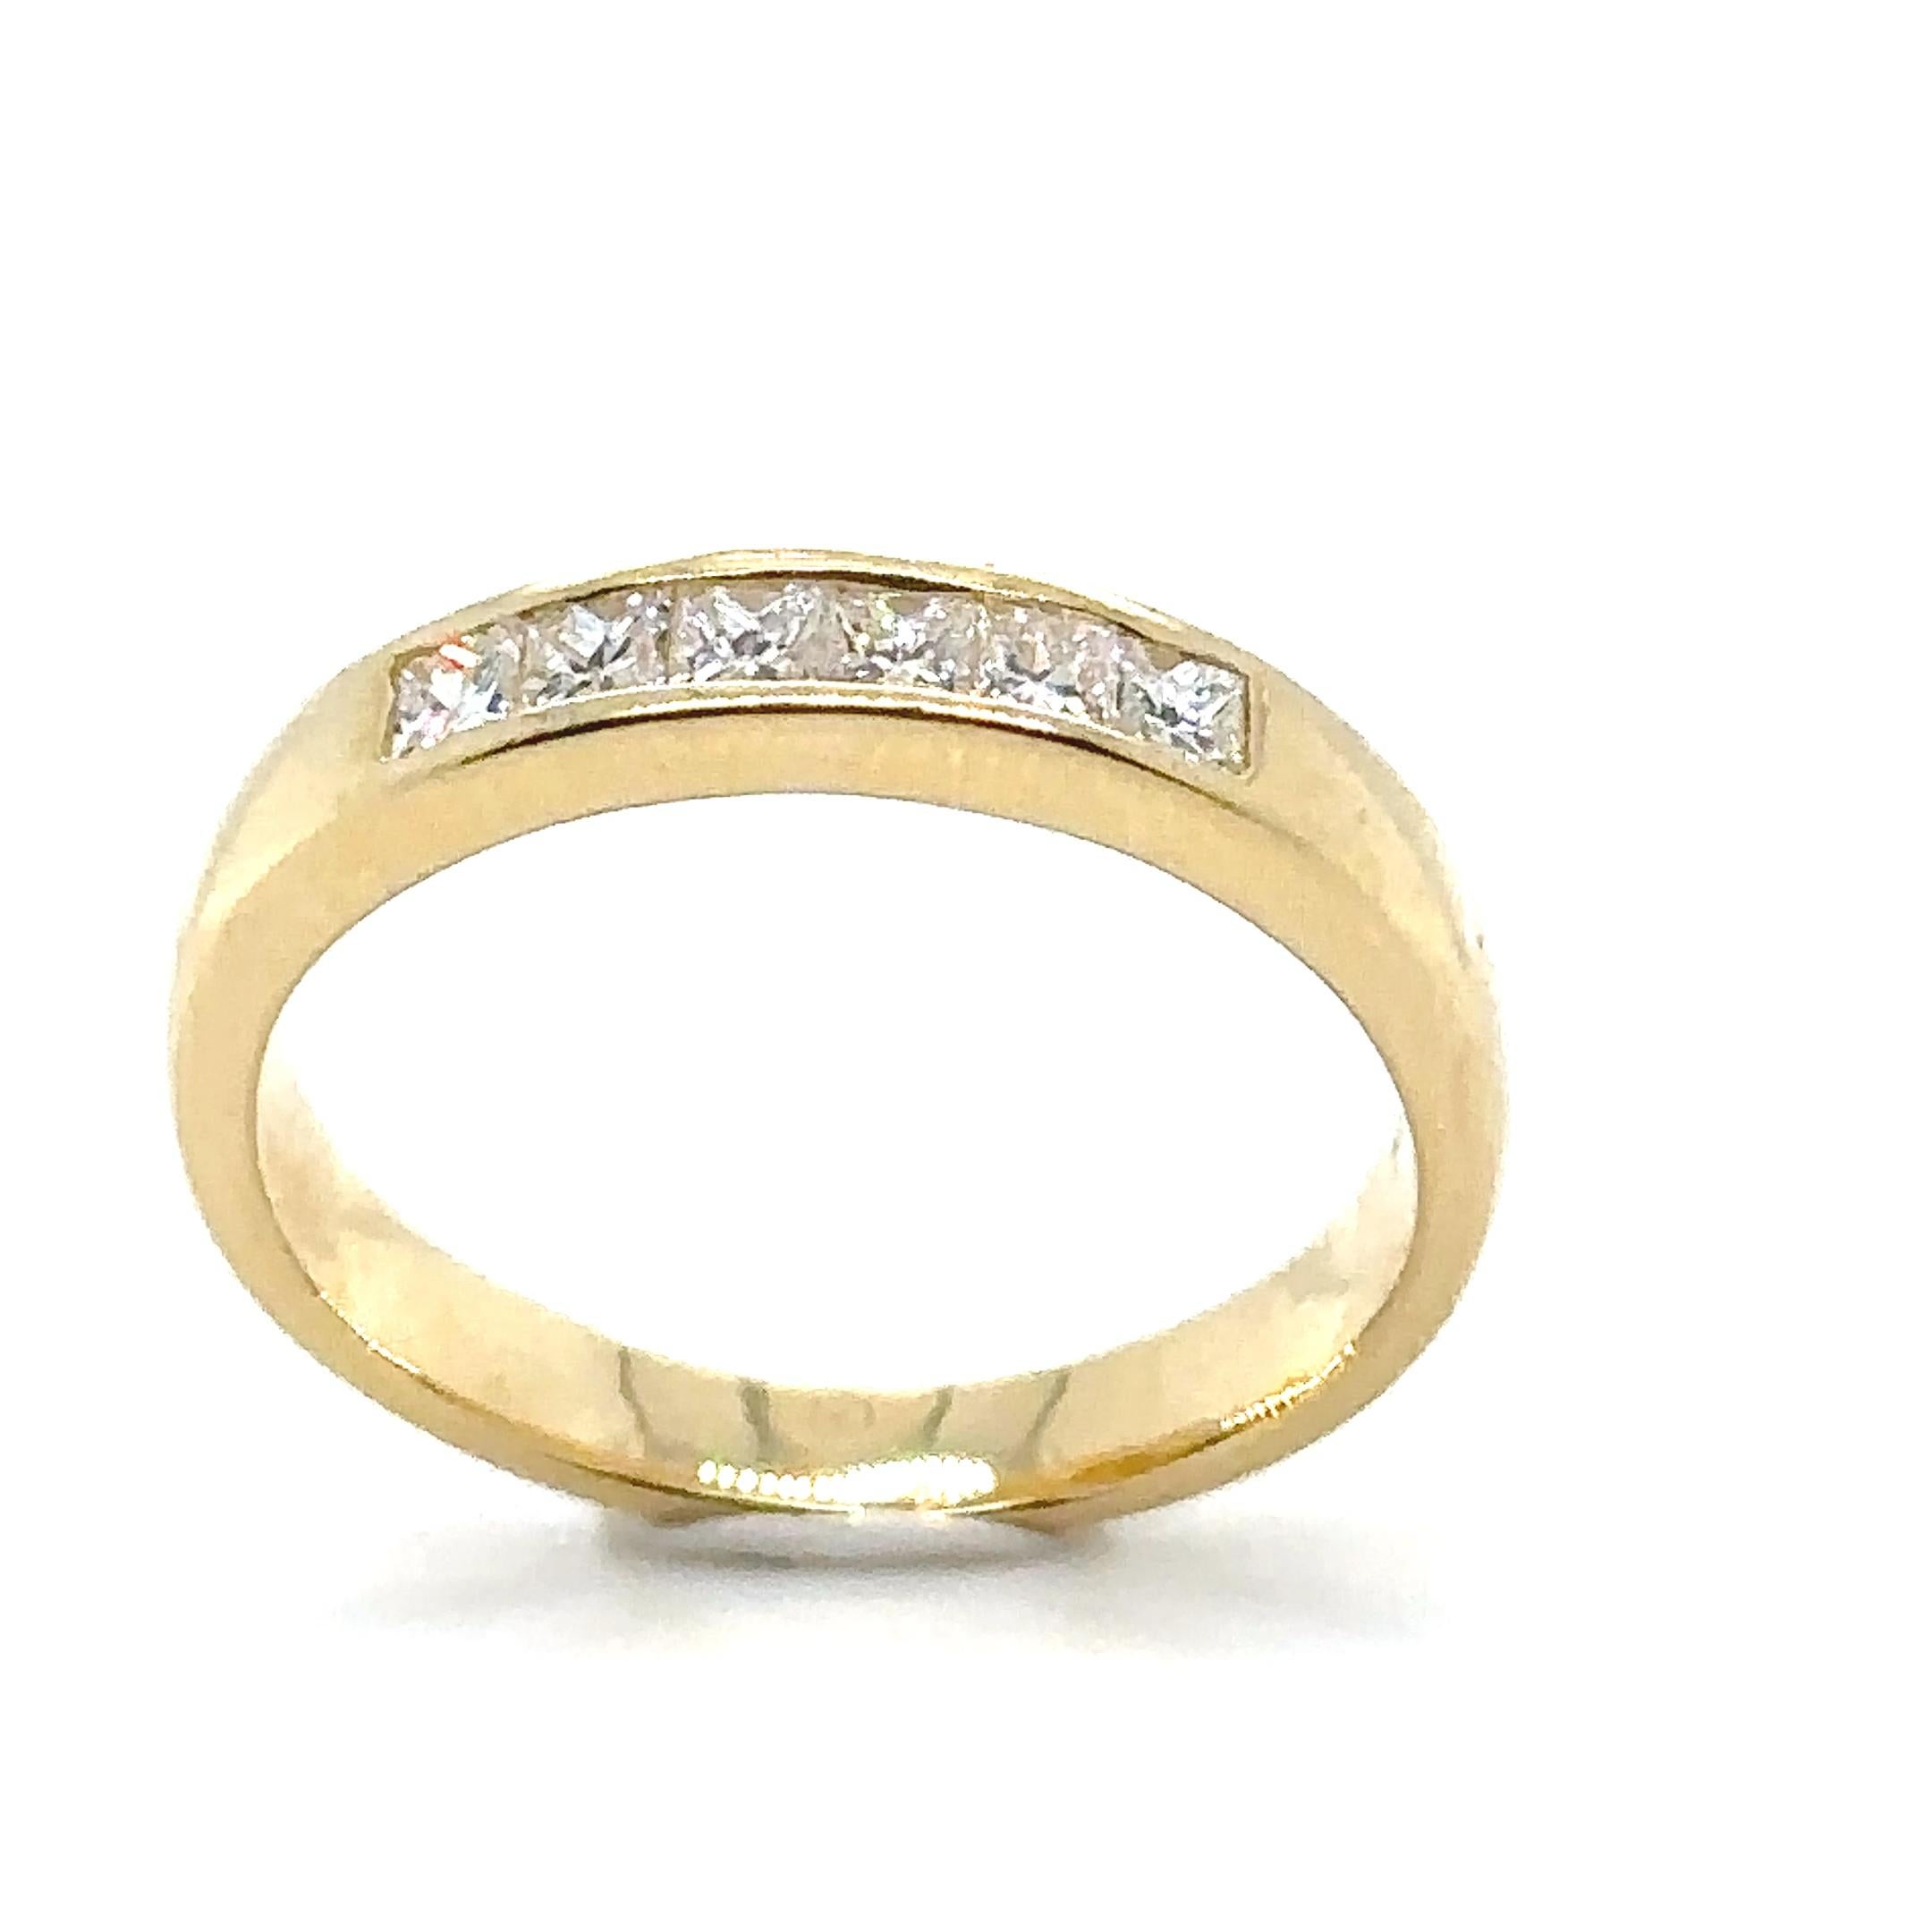 A Six Stone Princess Cut Diamond Ring, channel set on 18ct yellow gold on a 3.5 to 2.7mm tapered band.

Diamonds 6 = 0.40ct (estimated),

Graded in setting as Colour: F, Clarity: VS. Weight 3.93 grams.

Metal: 18ct Yellow Gold
Carat: 0.40ct
Colour: